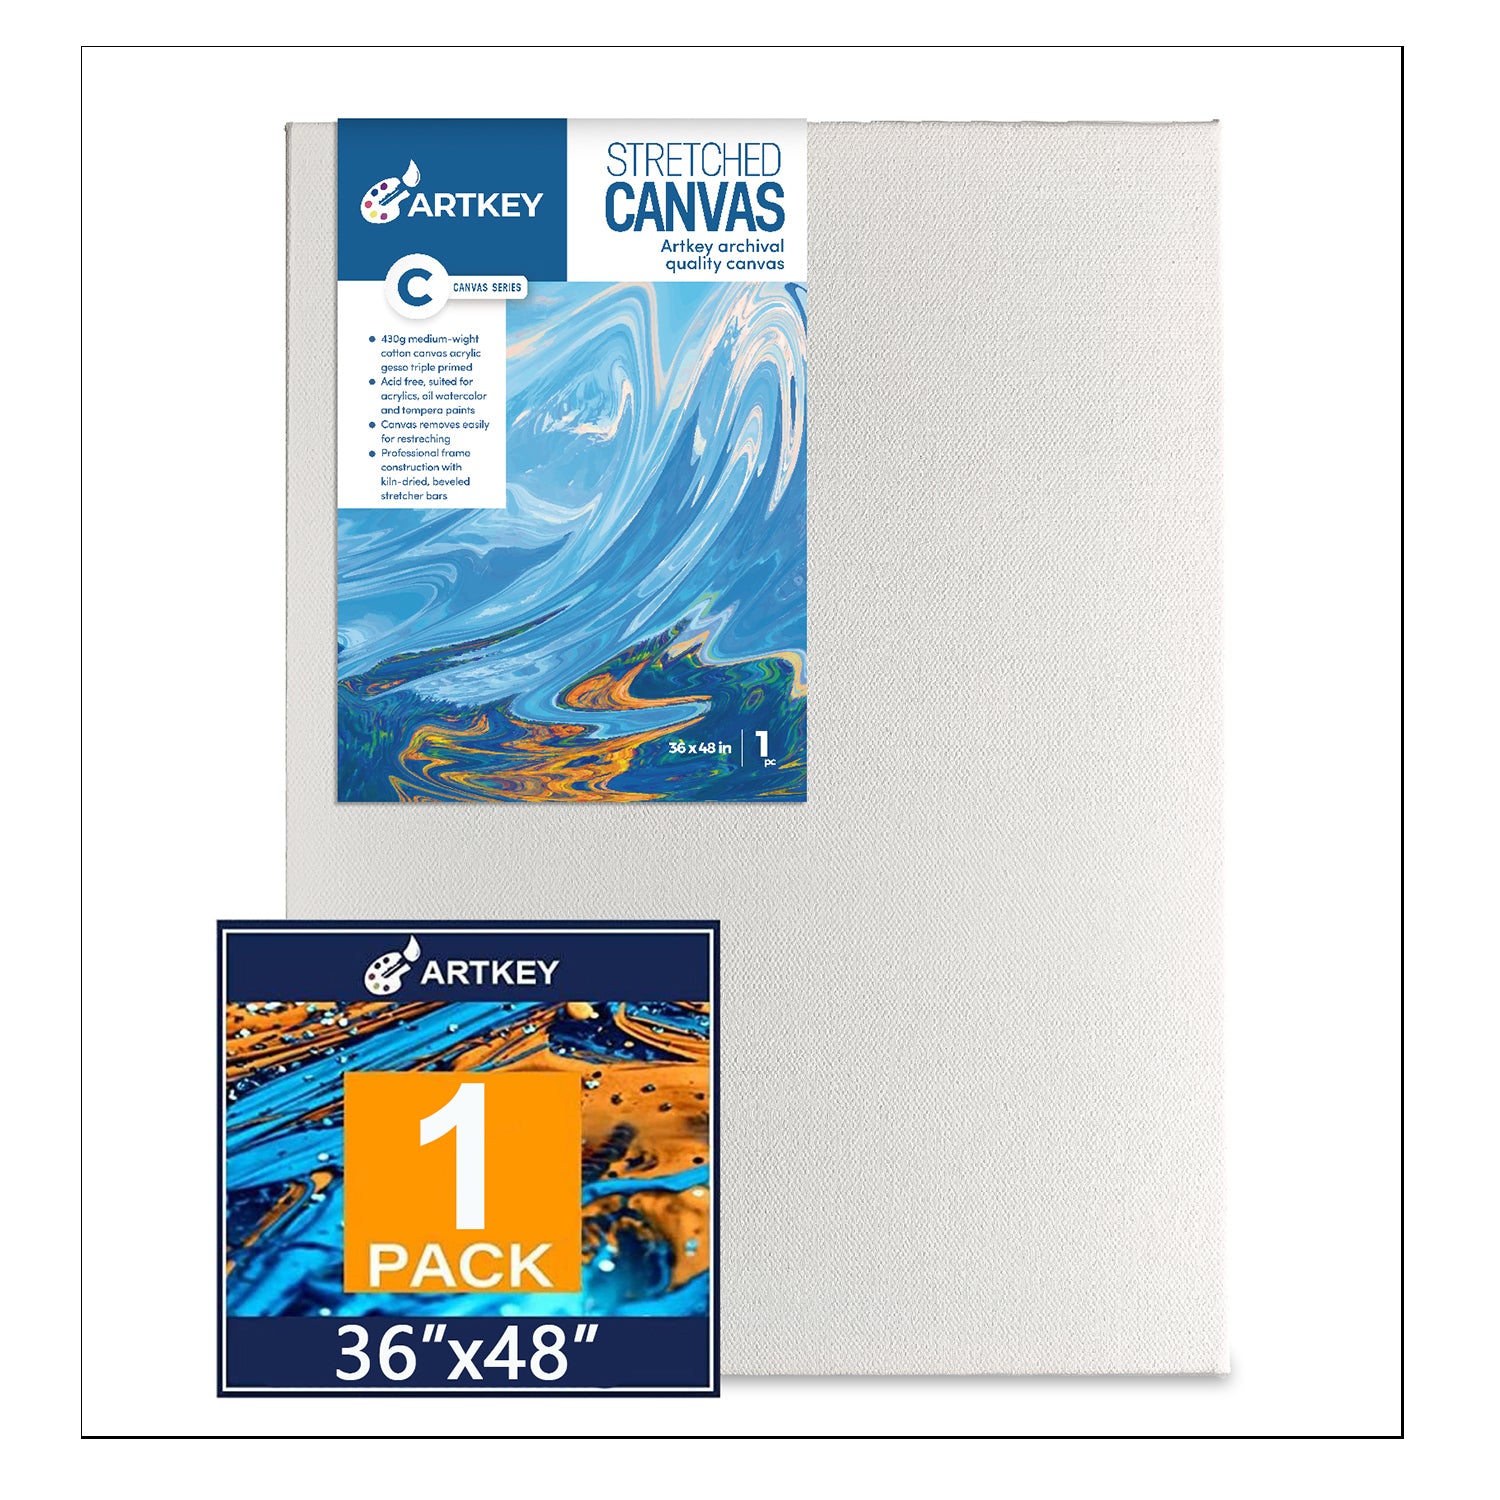 Large Canvases for Painting 36x48 Inch 2-Pack, 12.3 oz Triple Primed  Acid-Free 100% Cotton Stretched Canvas, Blank Large Canvas for Oil Paint  Acrylics